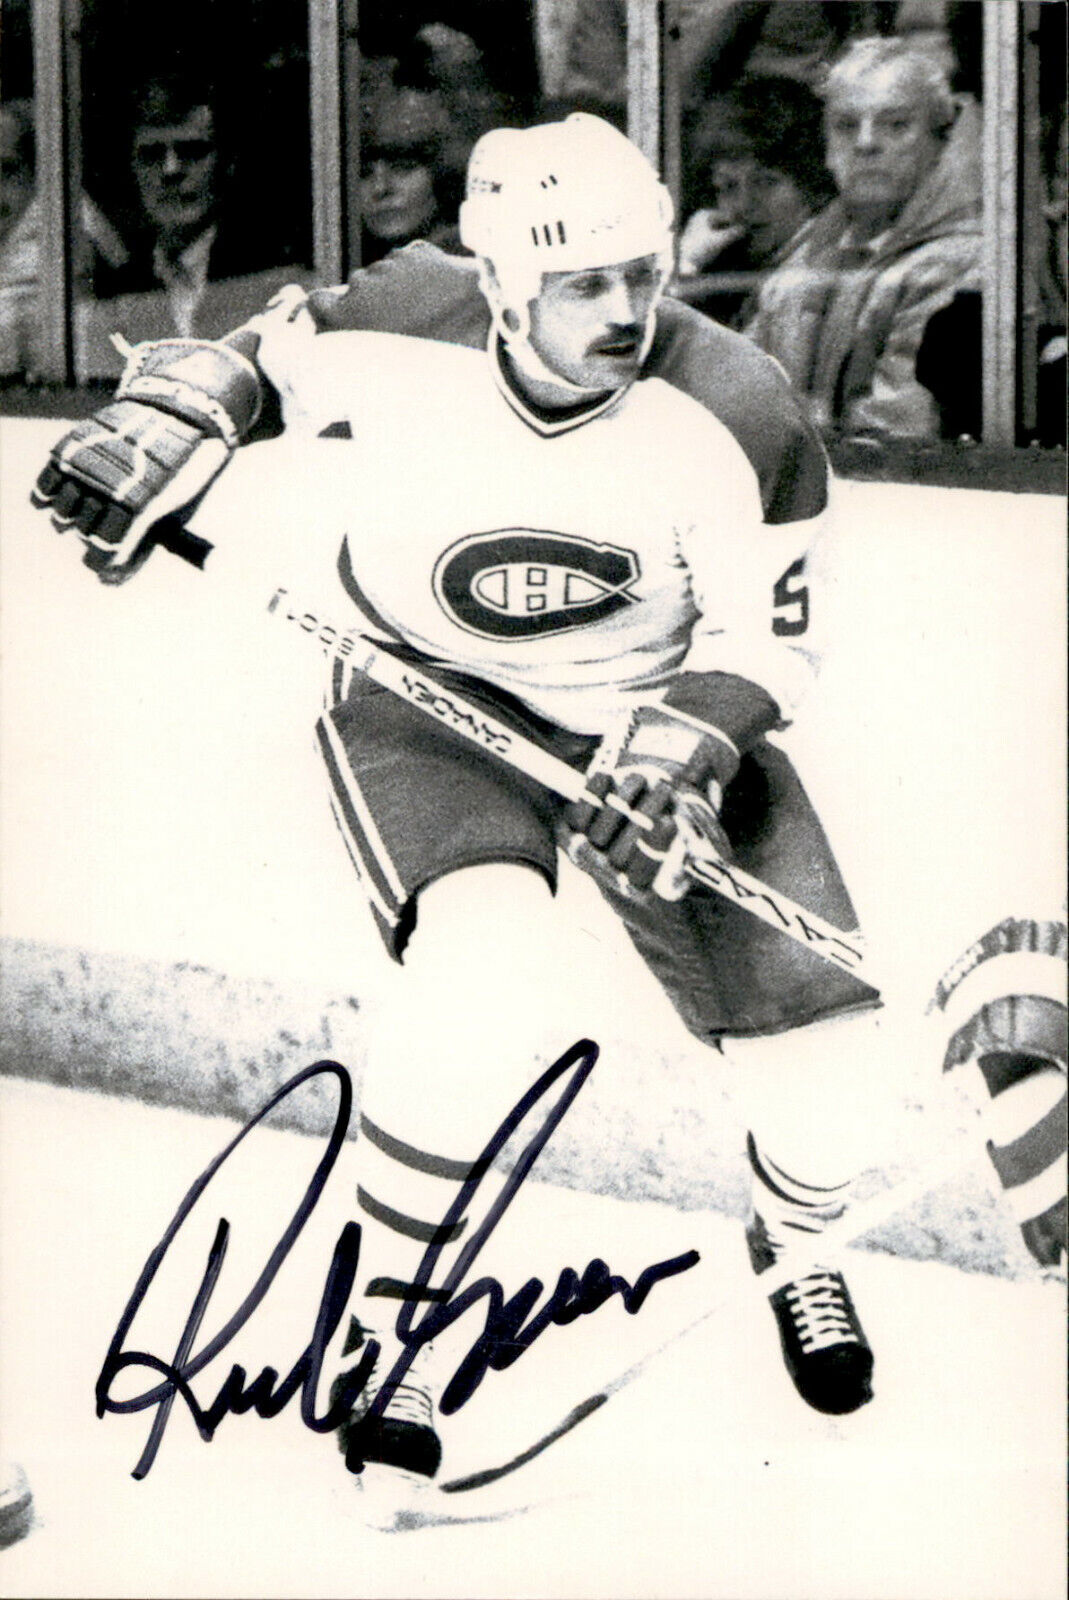 Rick Green SIGNED autographed 4x6 Photo Poster painting MONTREAL CANADIENS #2